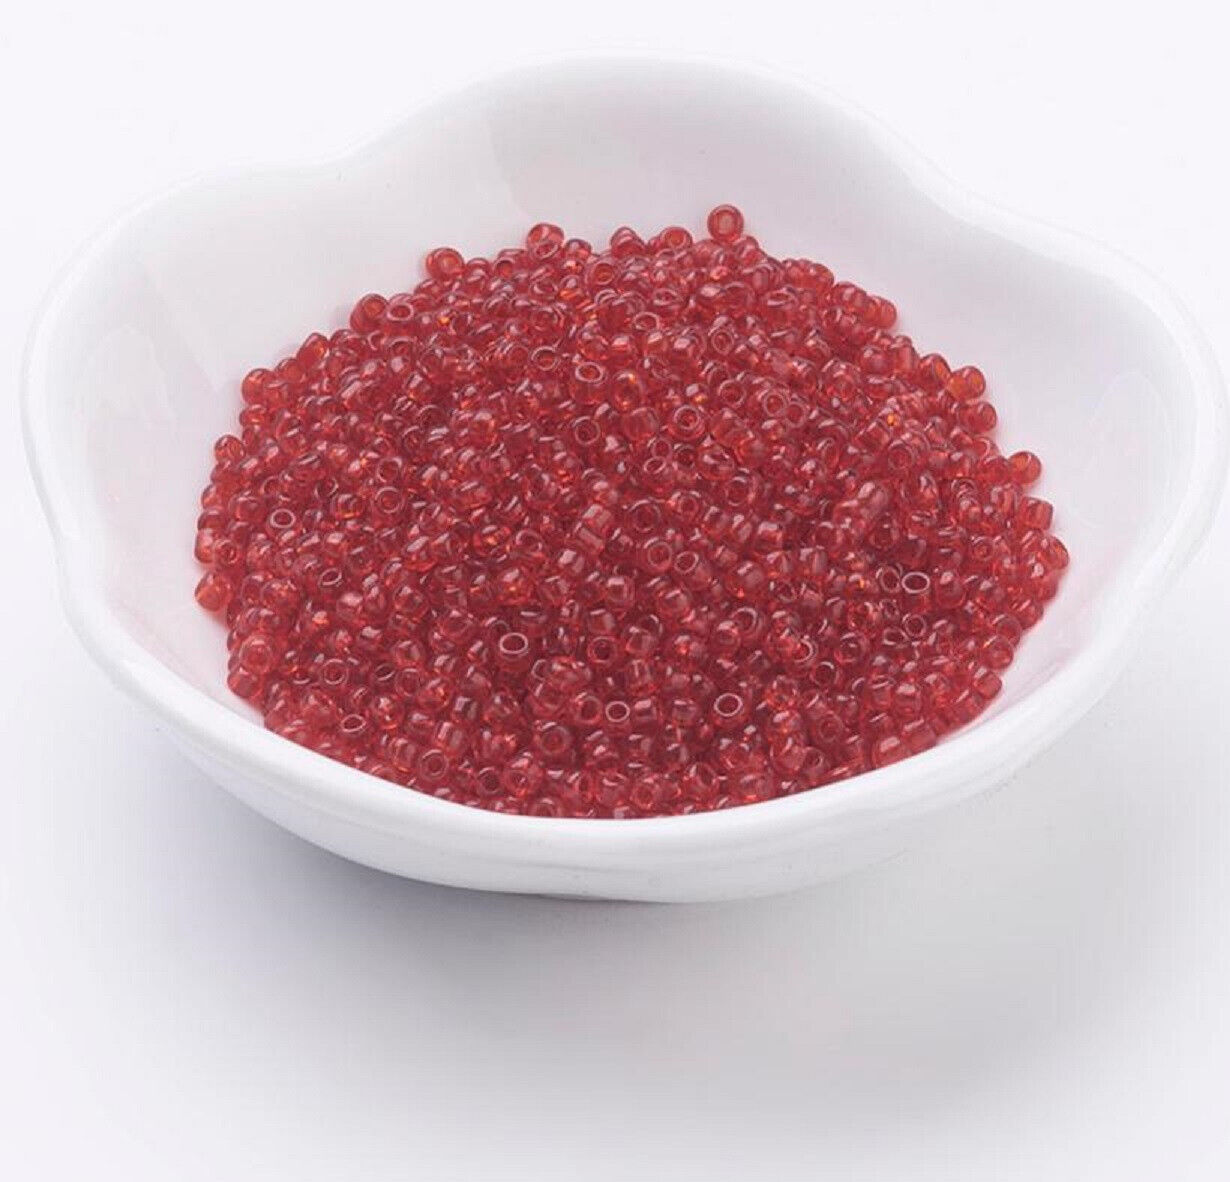 2mm translucent crimson red glass seed beads, 50g – Charms Galore